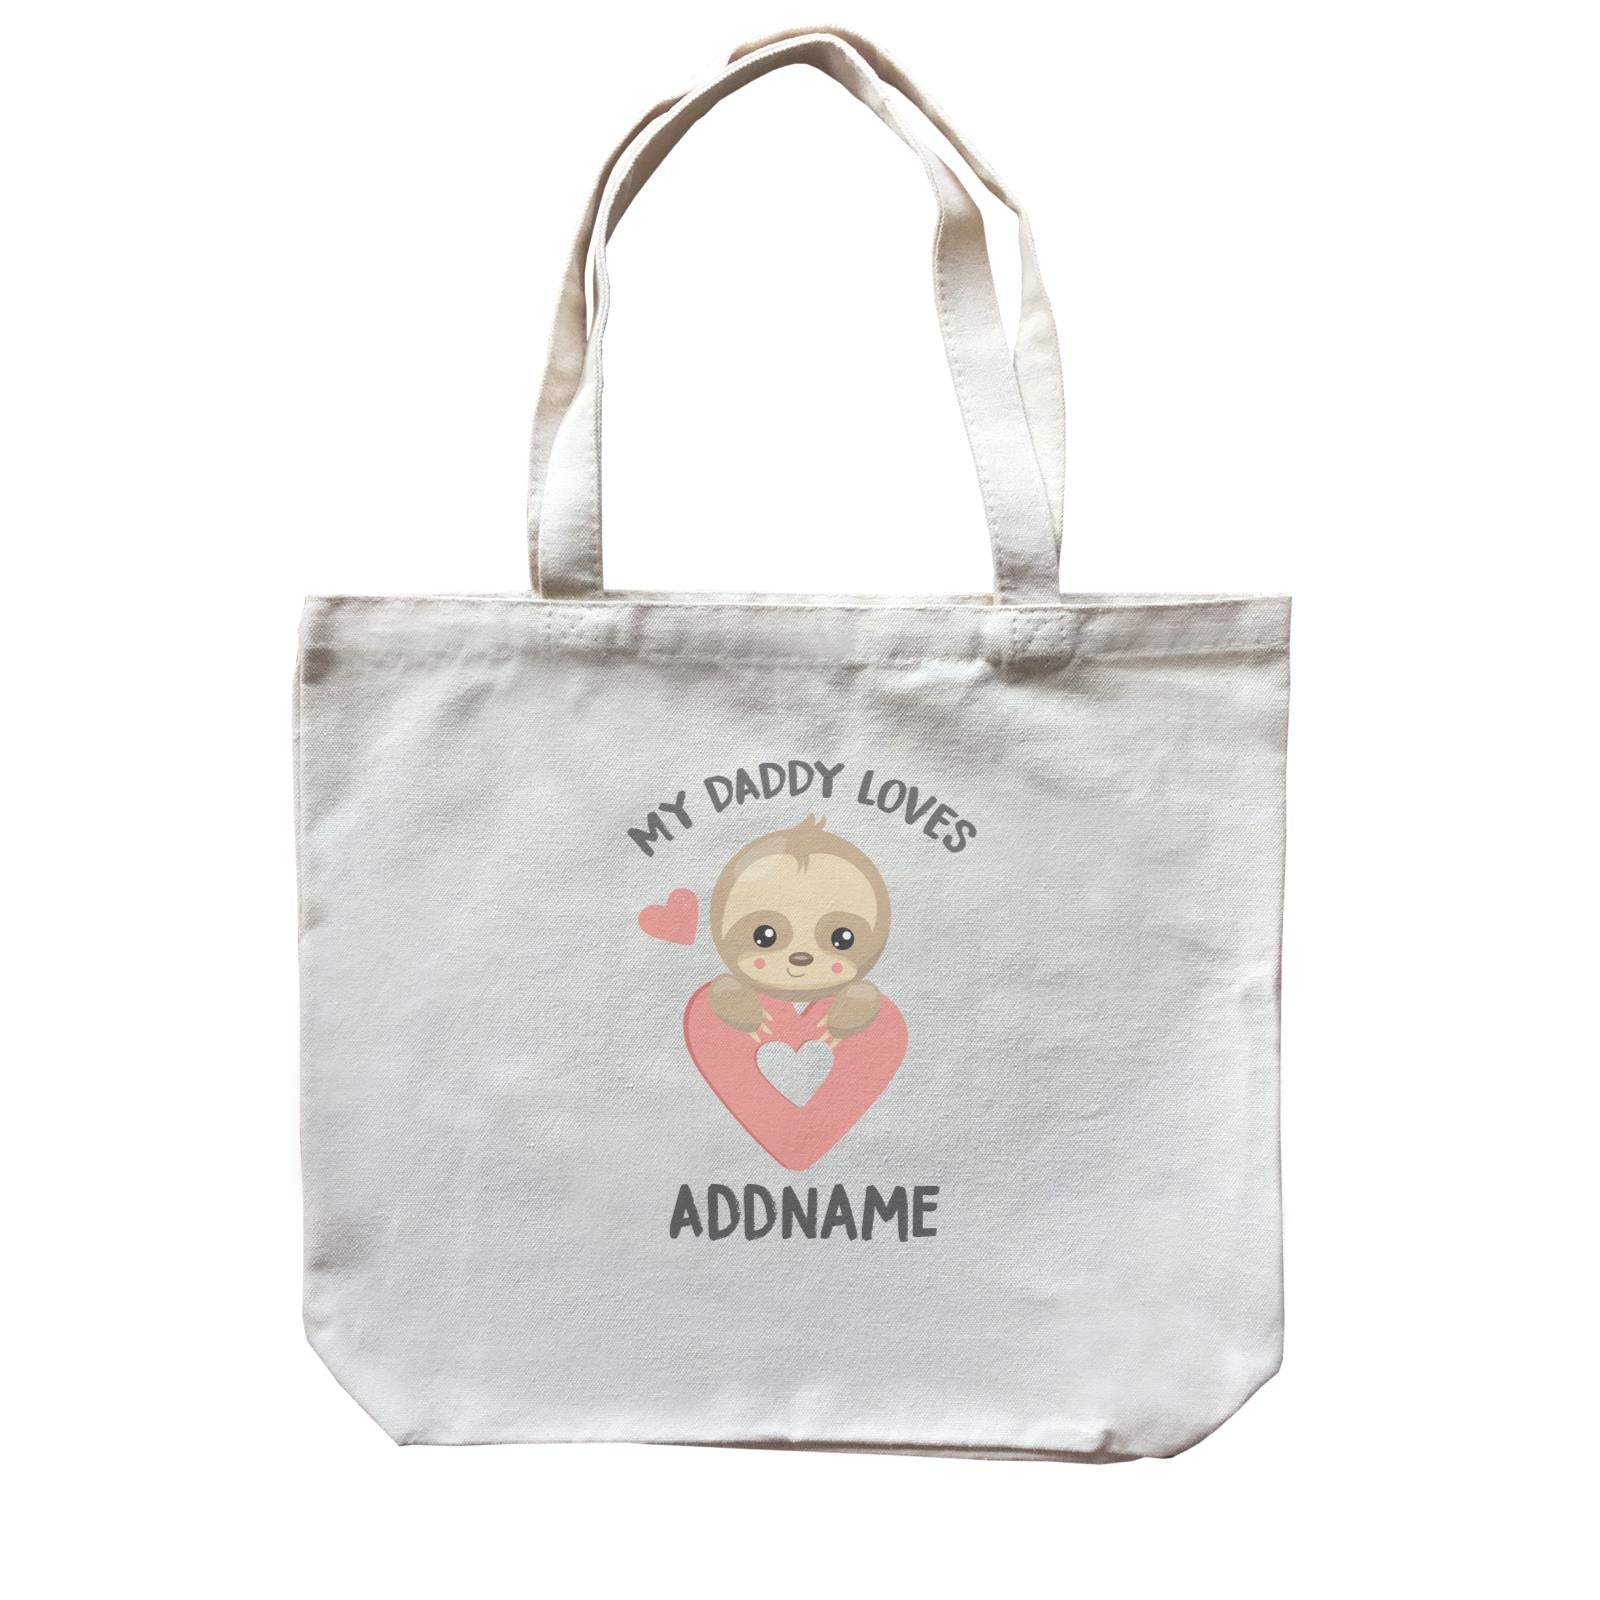 Cute Sloth My Daddy Loves Addname Canvas Bag